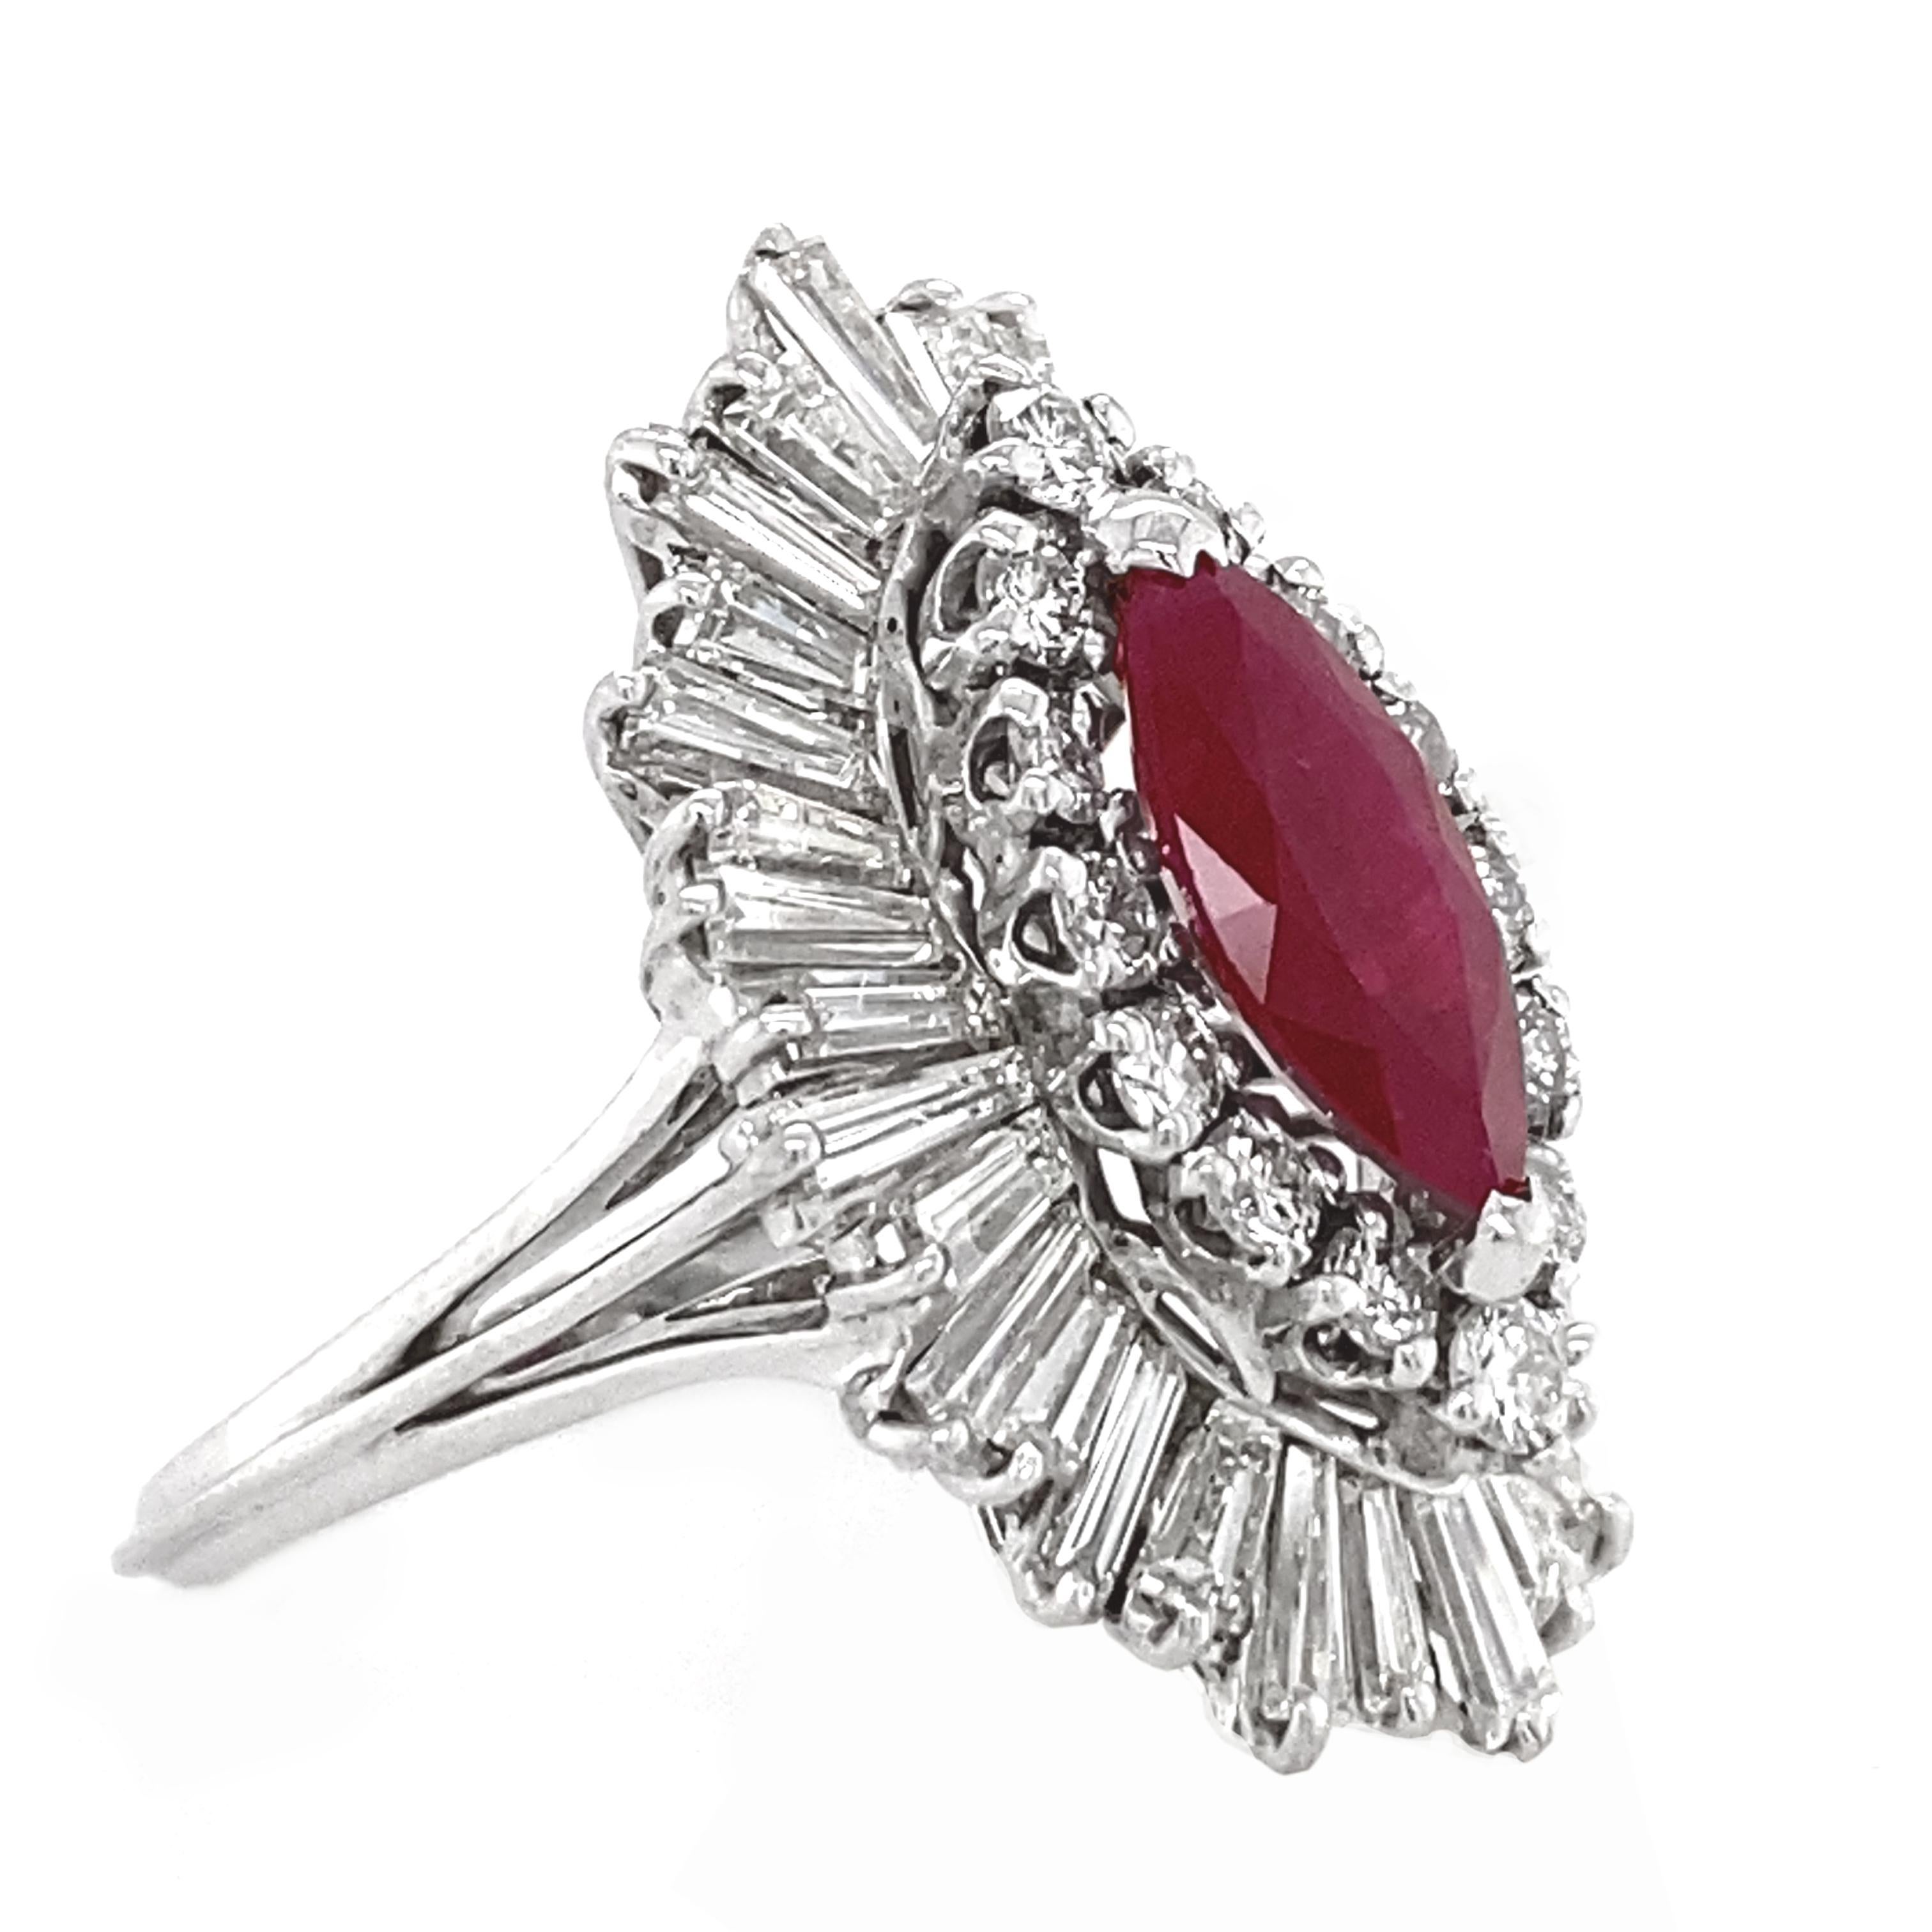 This classic ballerina ring -- with baguettes of various sizes forming a 